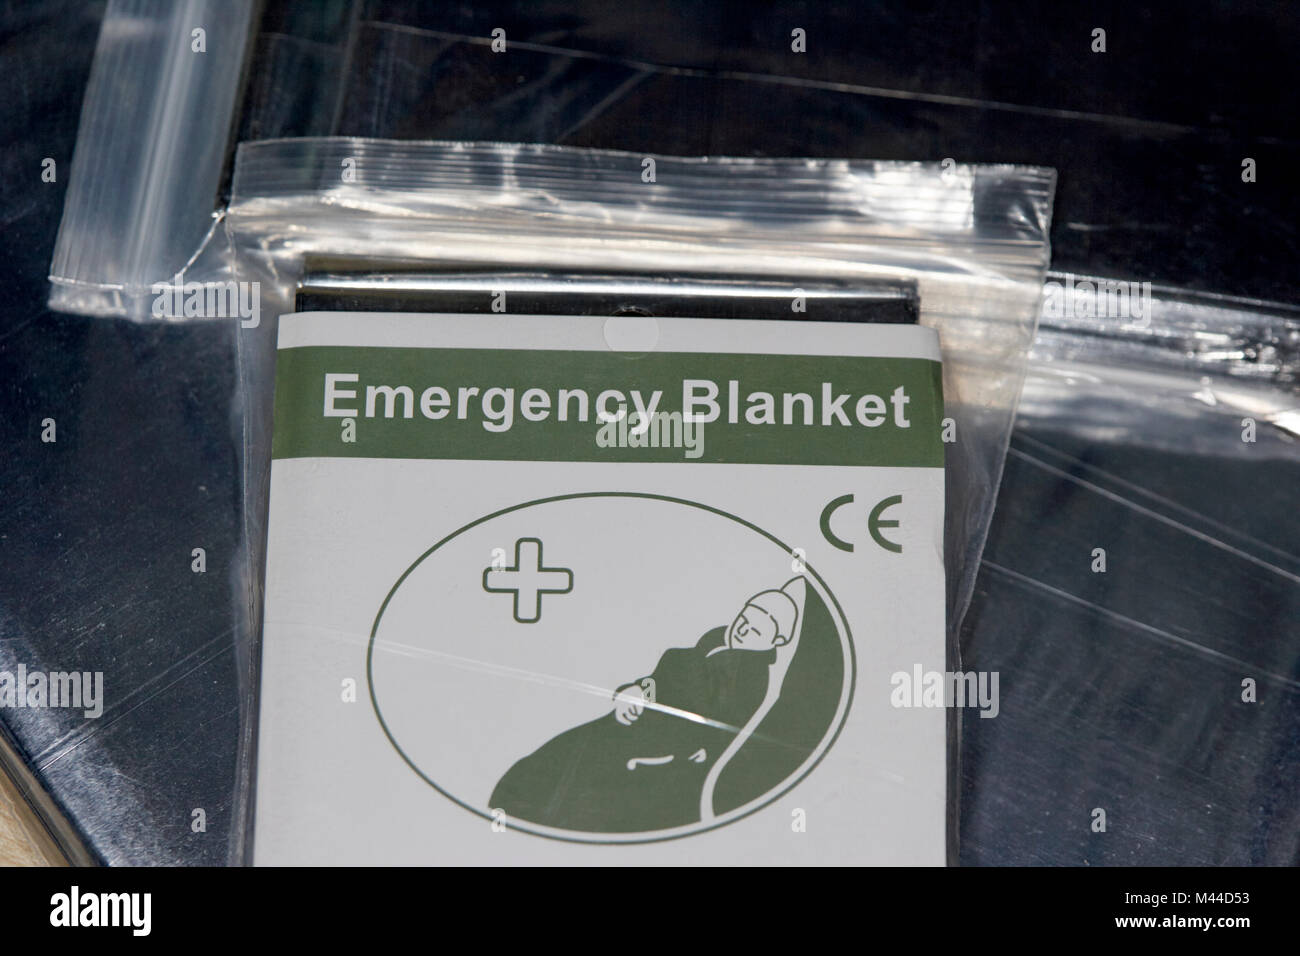 emergency foil blankets for first aid and sports use Stock Photo